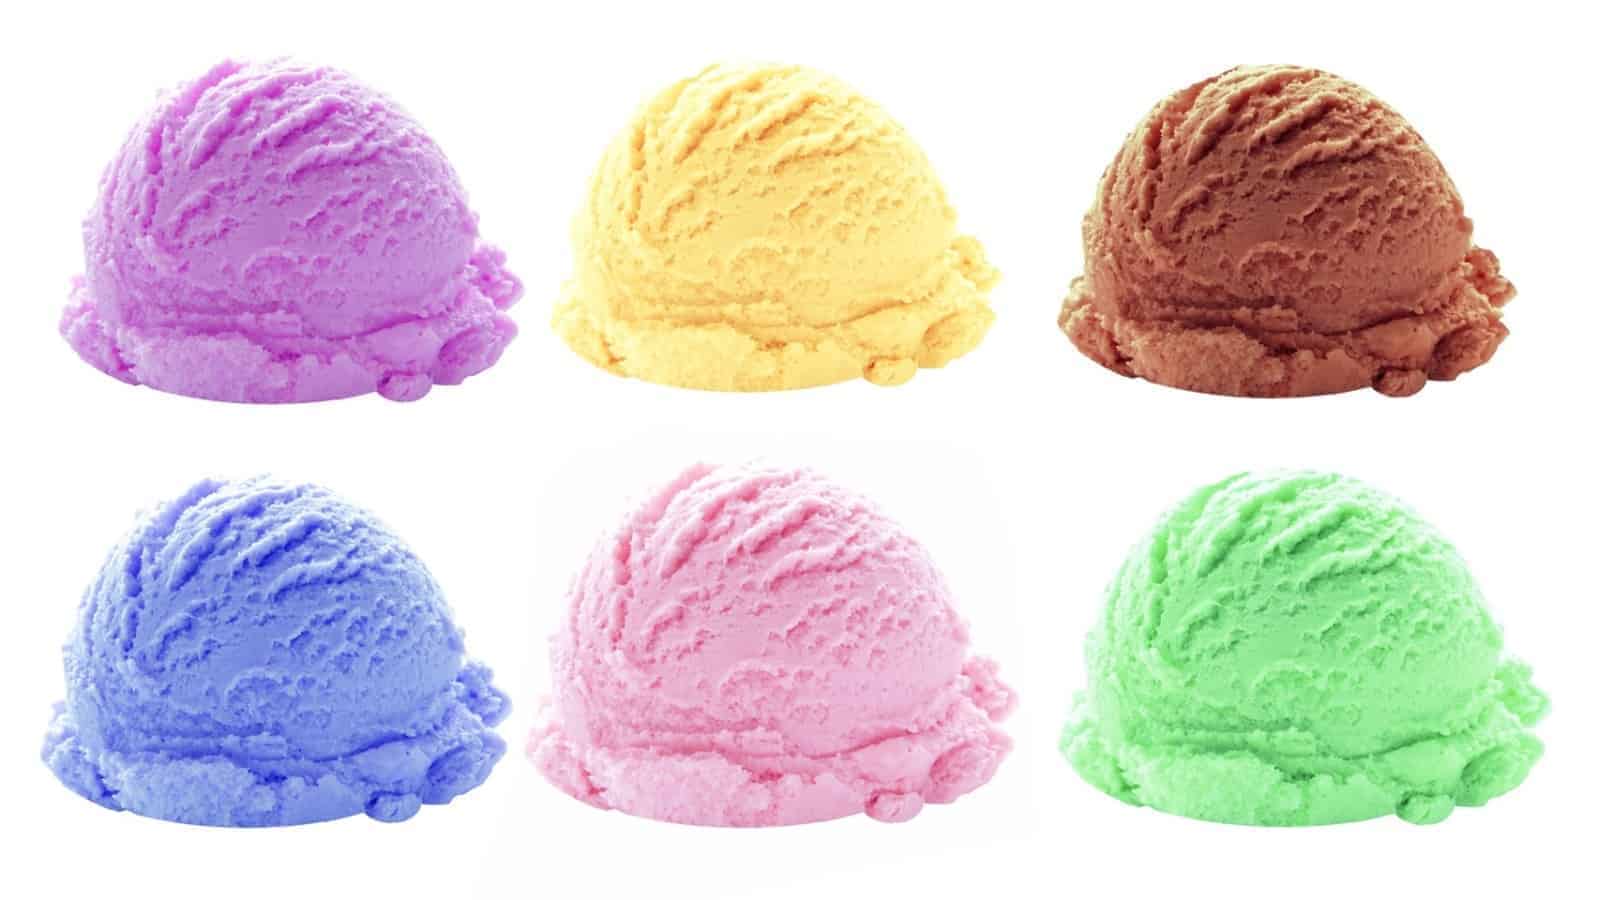 What Does Your Favorite Ice Cream Flavor Reveal About Your Personality?